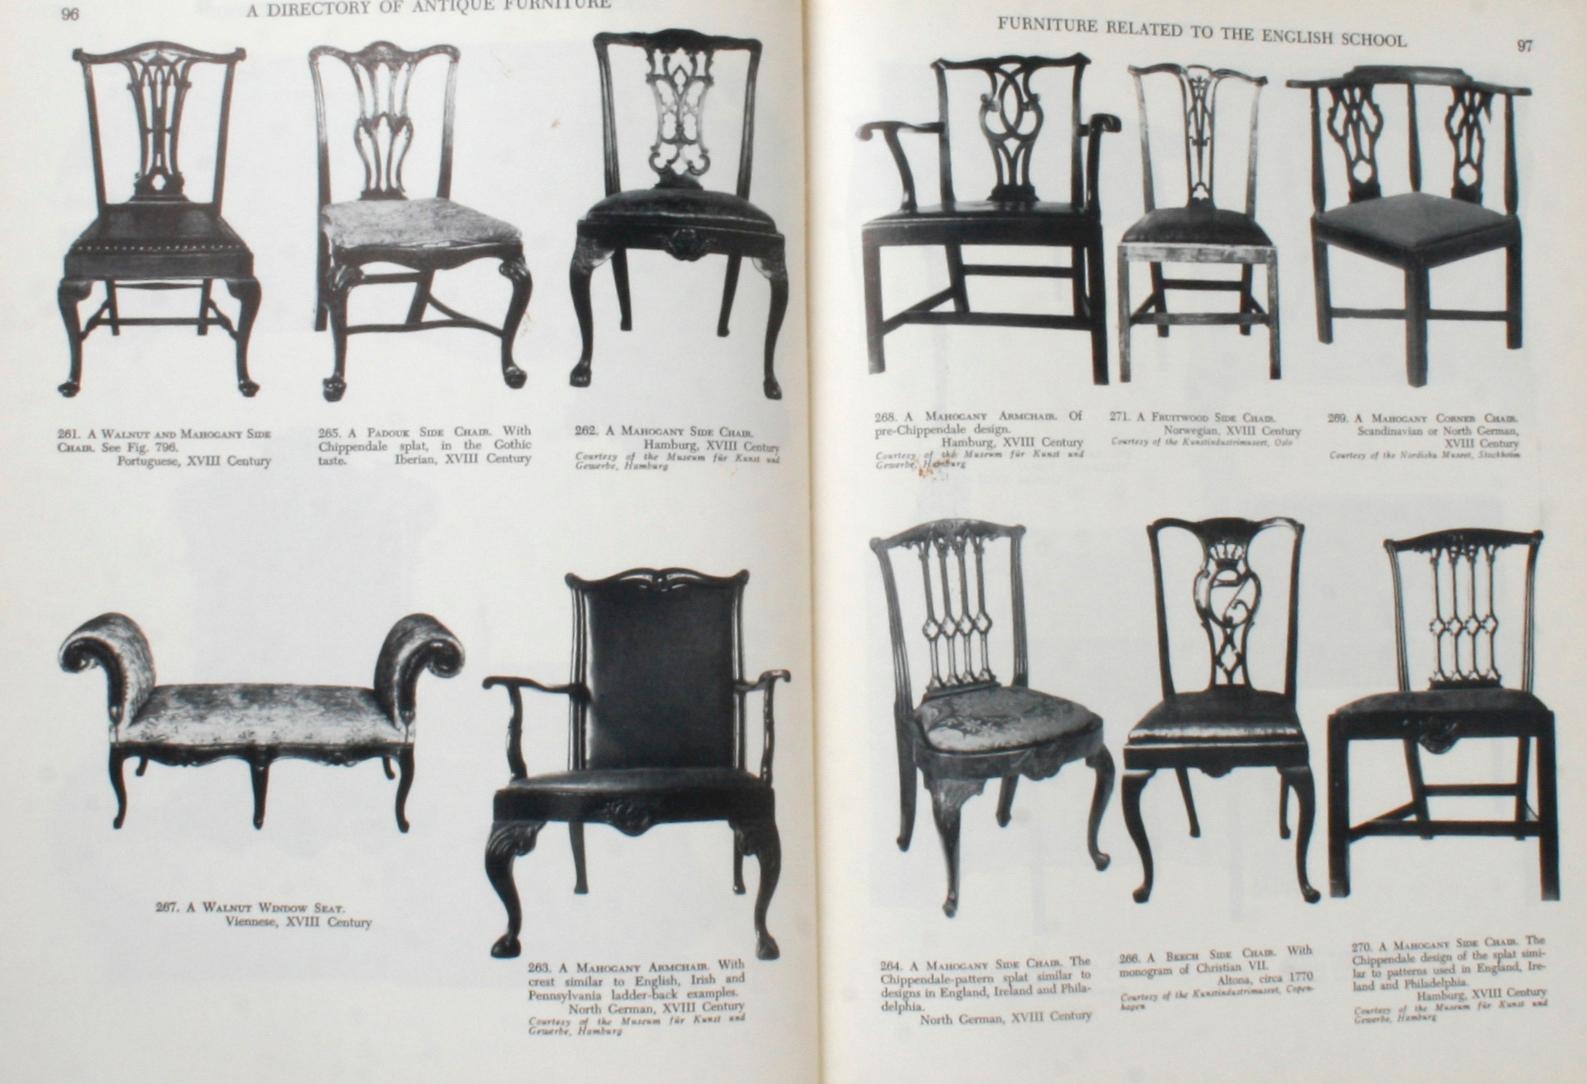 Directory of Antique Furniture by F. Lewis Hinckley 2